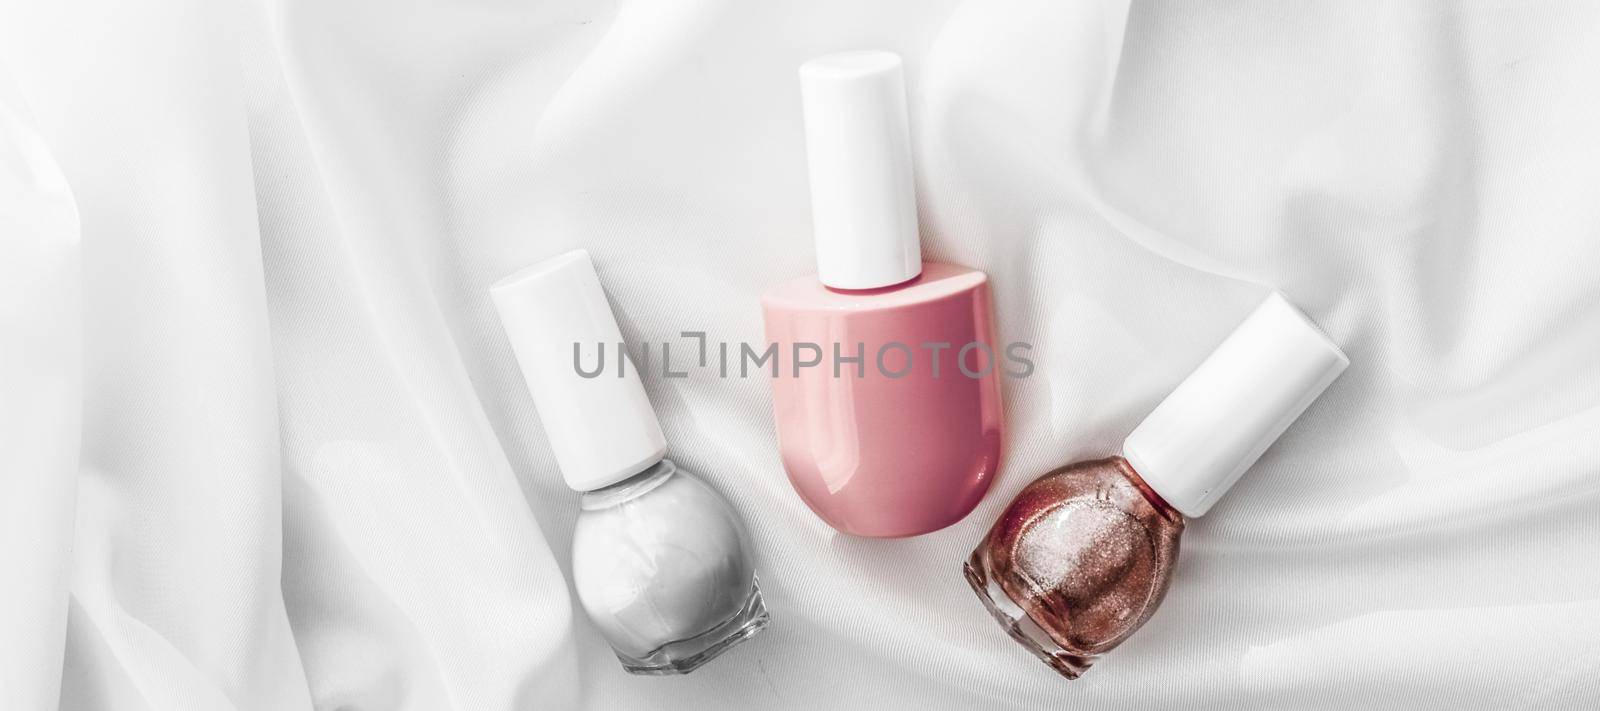 Cosmetic branding, salon and glamour concept - Nail polish bottles on silk background, french manicure products and nailpolish make-up cosmetics for luxury beauty brand and holiday flatlay art design